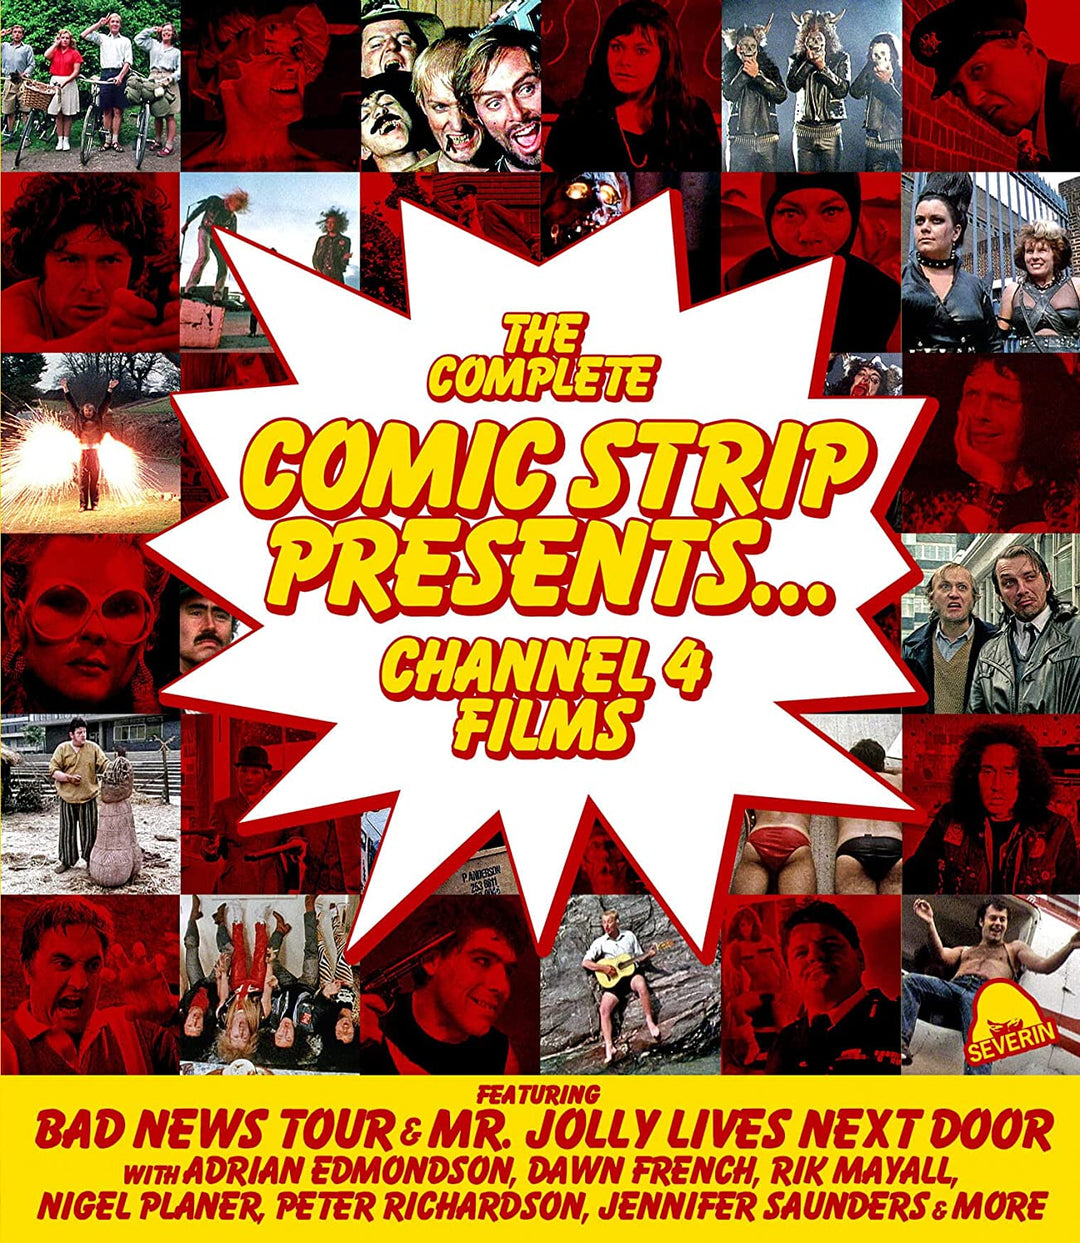 THE UK’s LEGENDARY ‘80s COMEDY SERIES  PREMIERES ON U.S. BLU-RAY WITH  THE COMPLETE COMIC STRIP PRESENTS… CHANNEL 4 FILMS